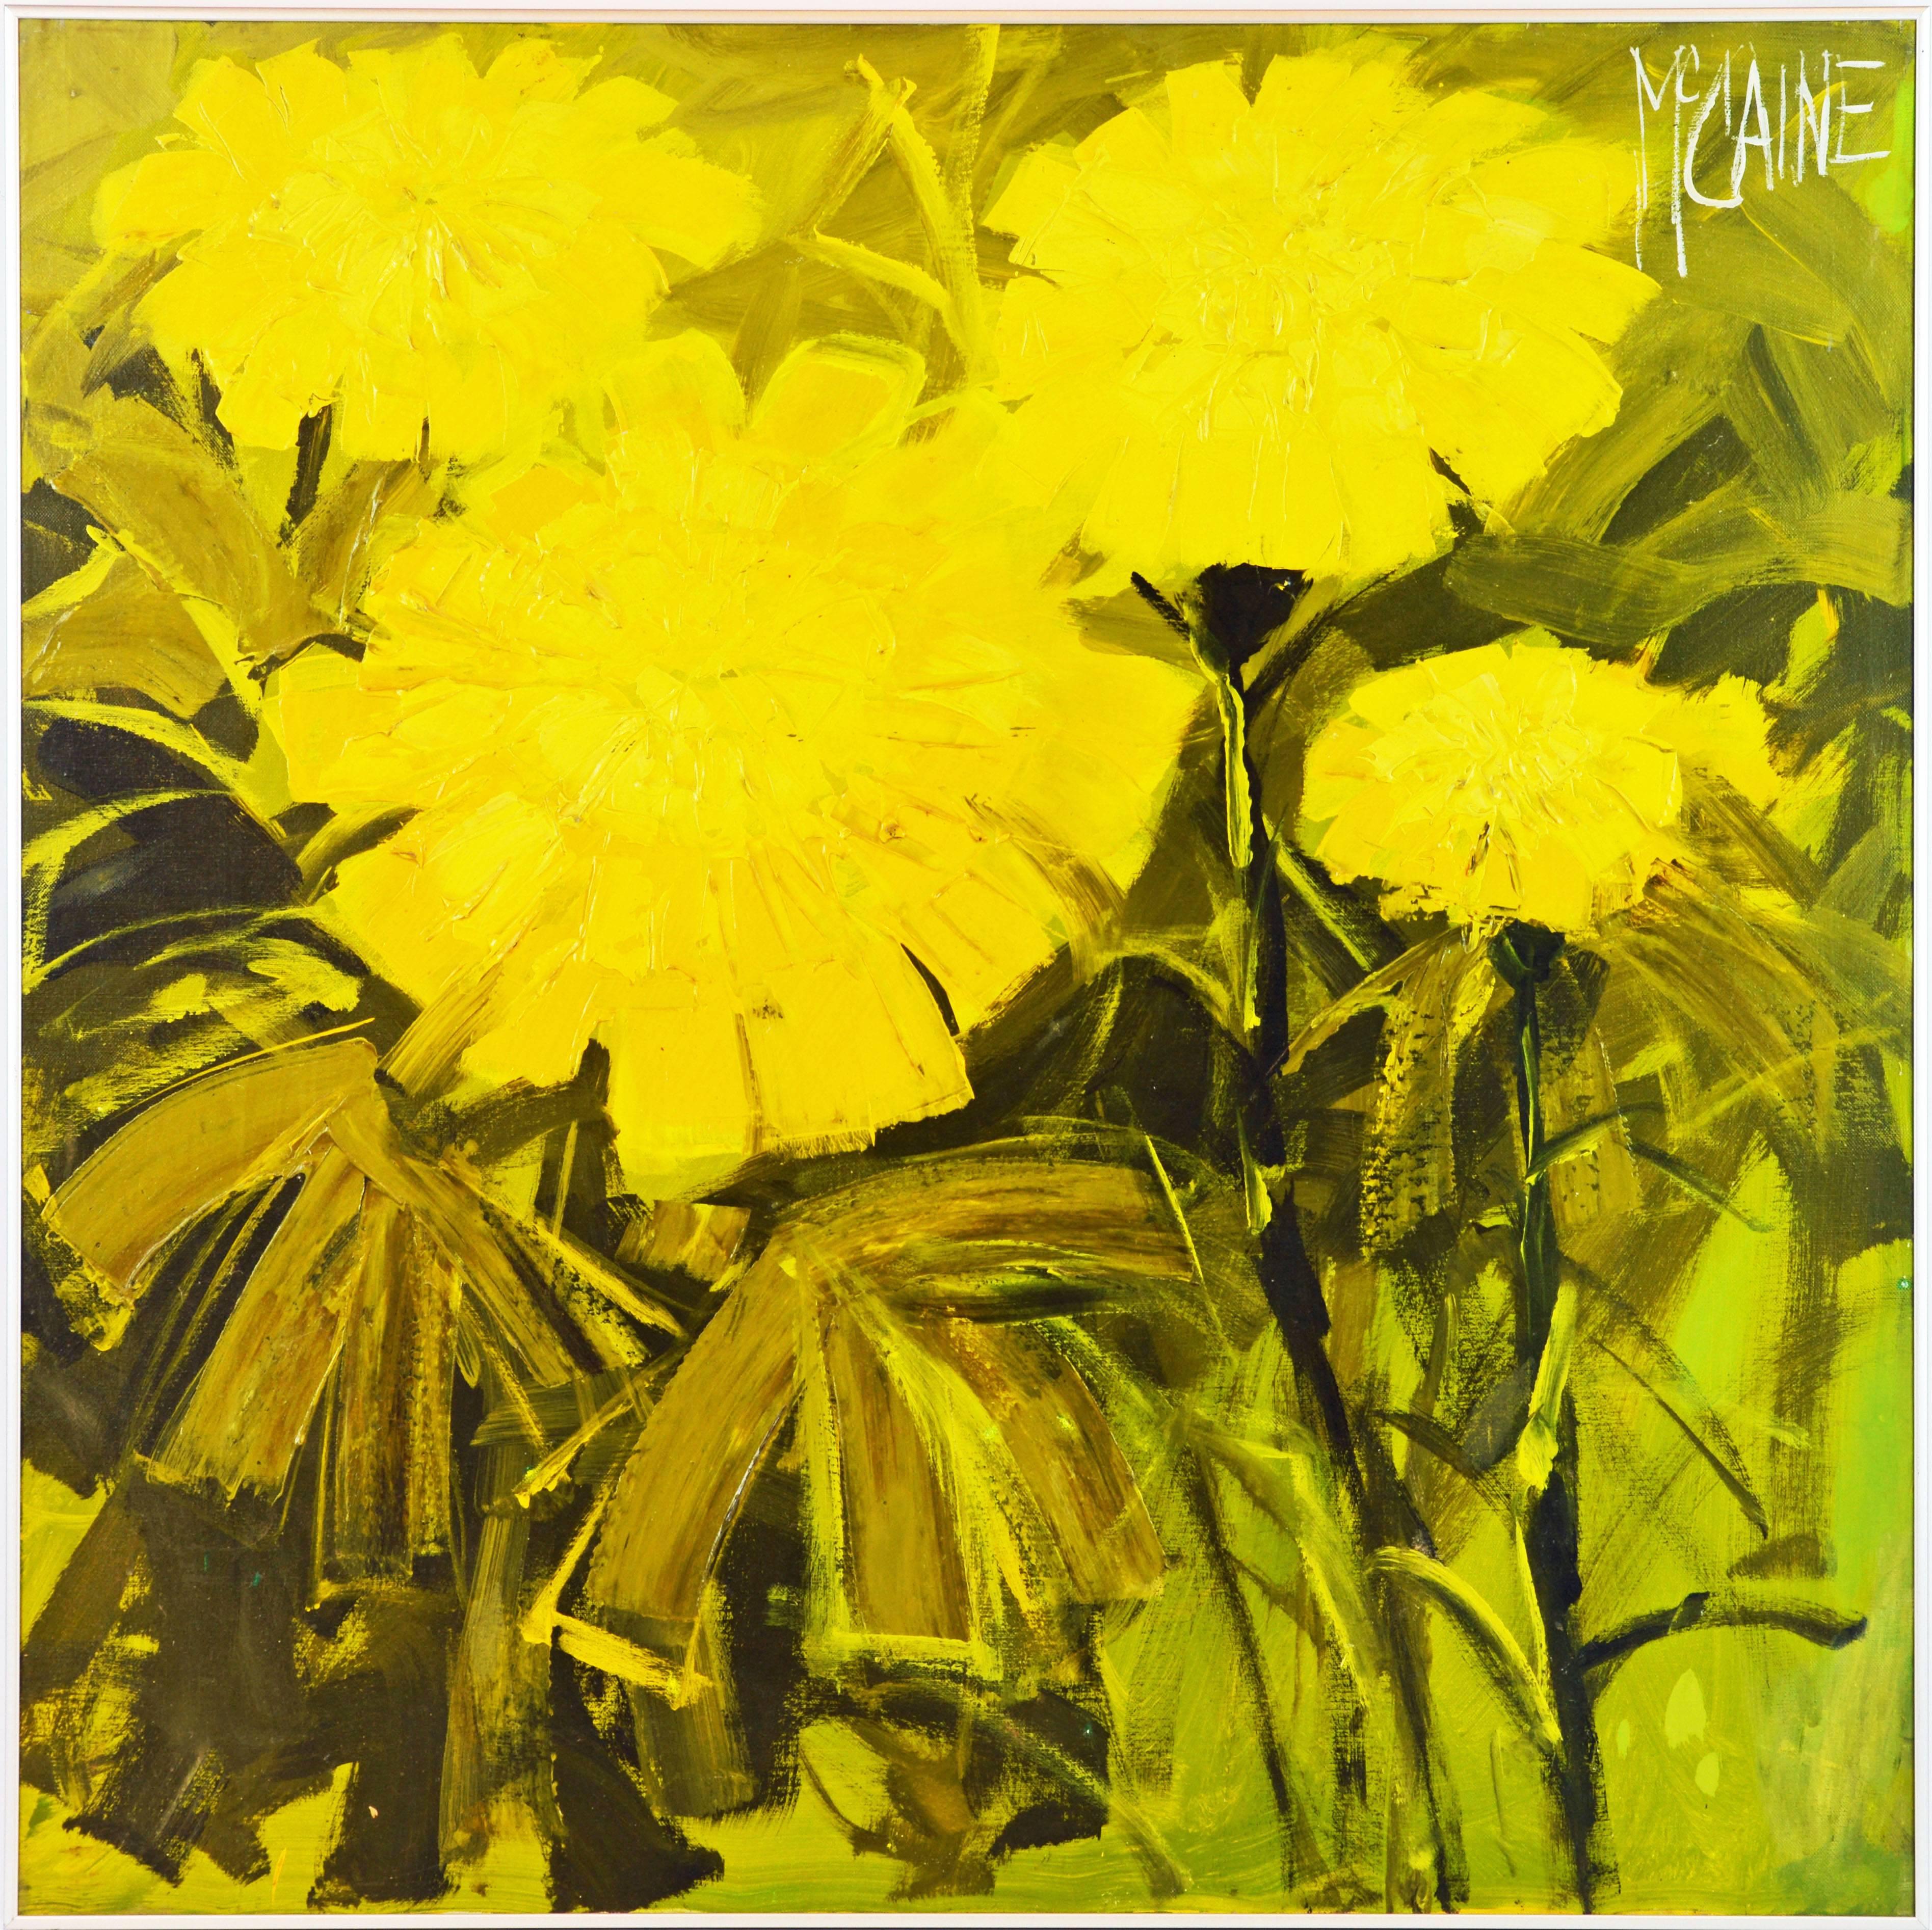 'Yellow Flowers in the Sun
by Robert McCaine, Mid-Century palm springs artist
36 x 36 in. w/o frame, 36.5 x 36.5 in. including frame
Oil on canvas, signed upper right corner
Housed in a modern minimalist brushed aluminum frame.

Robert